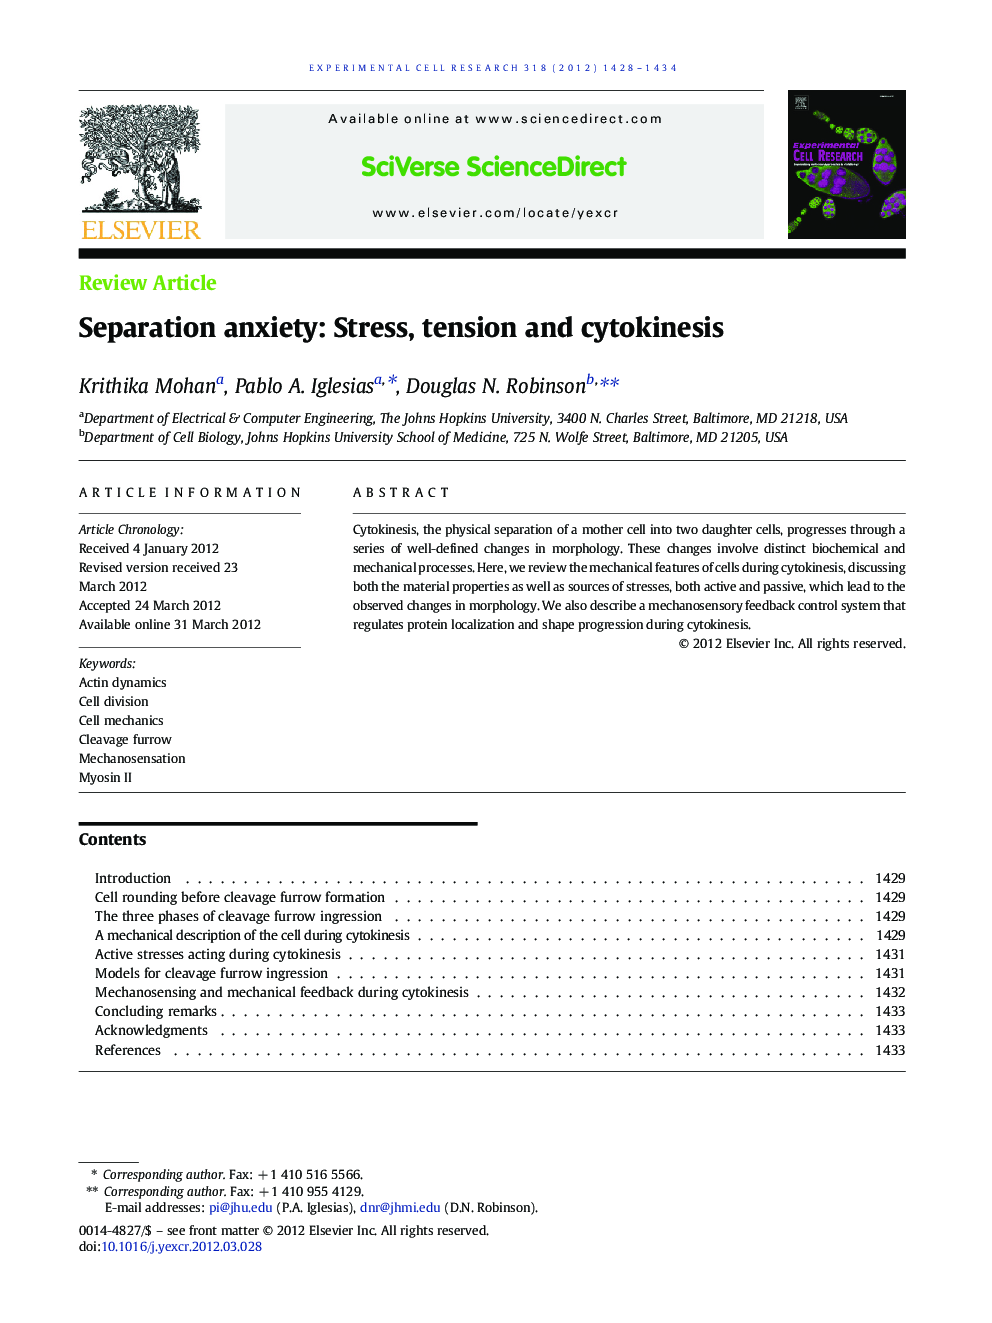 Separation anxiety: Stress, tension and cytokinesis